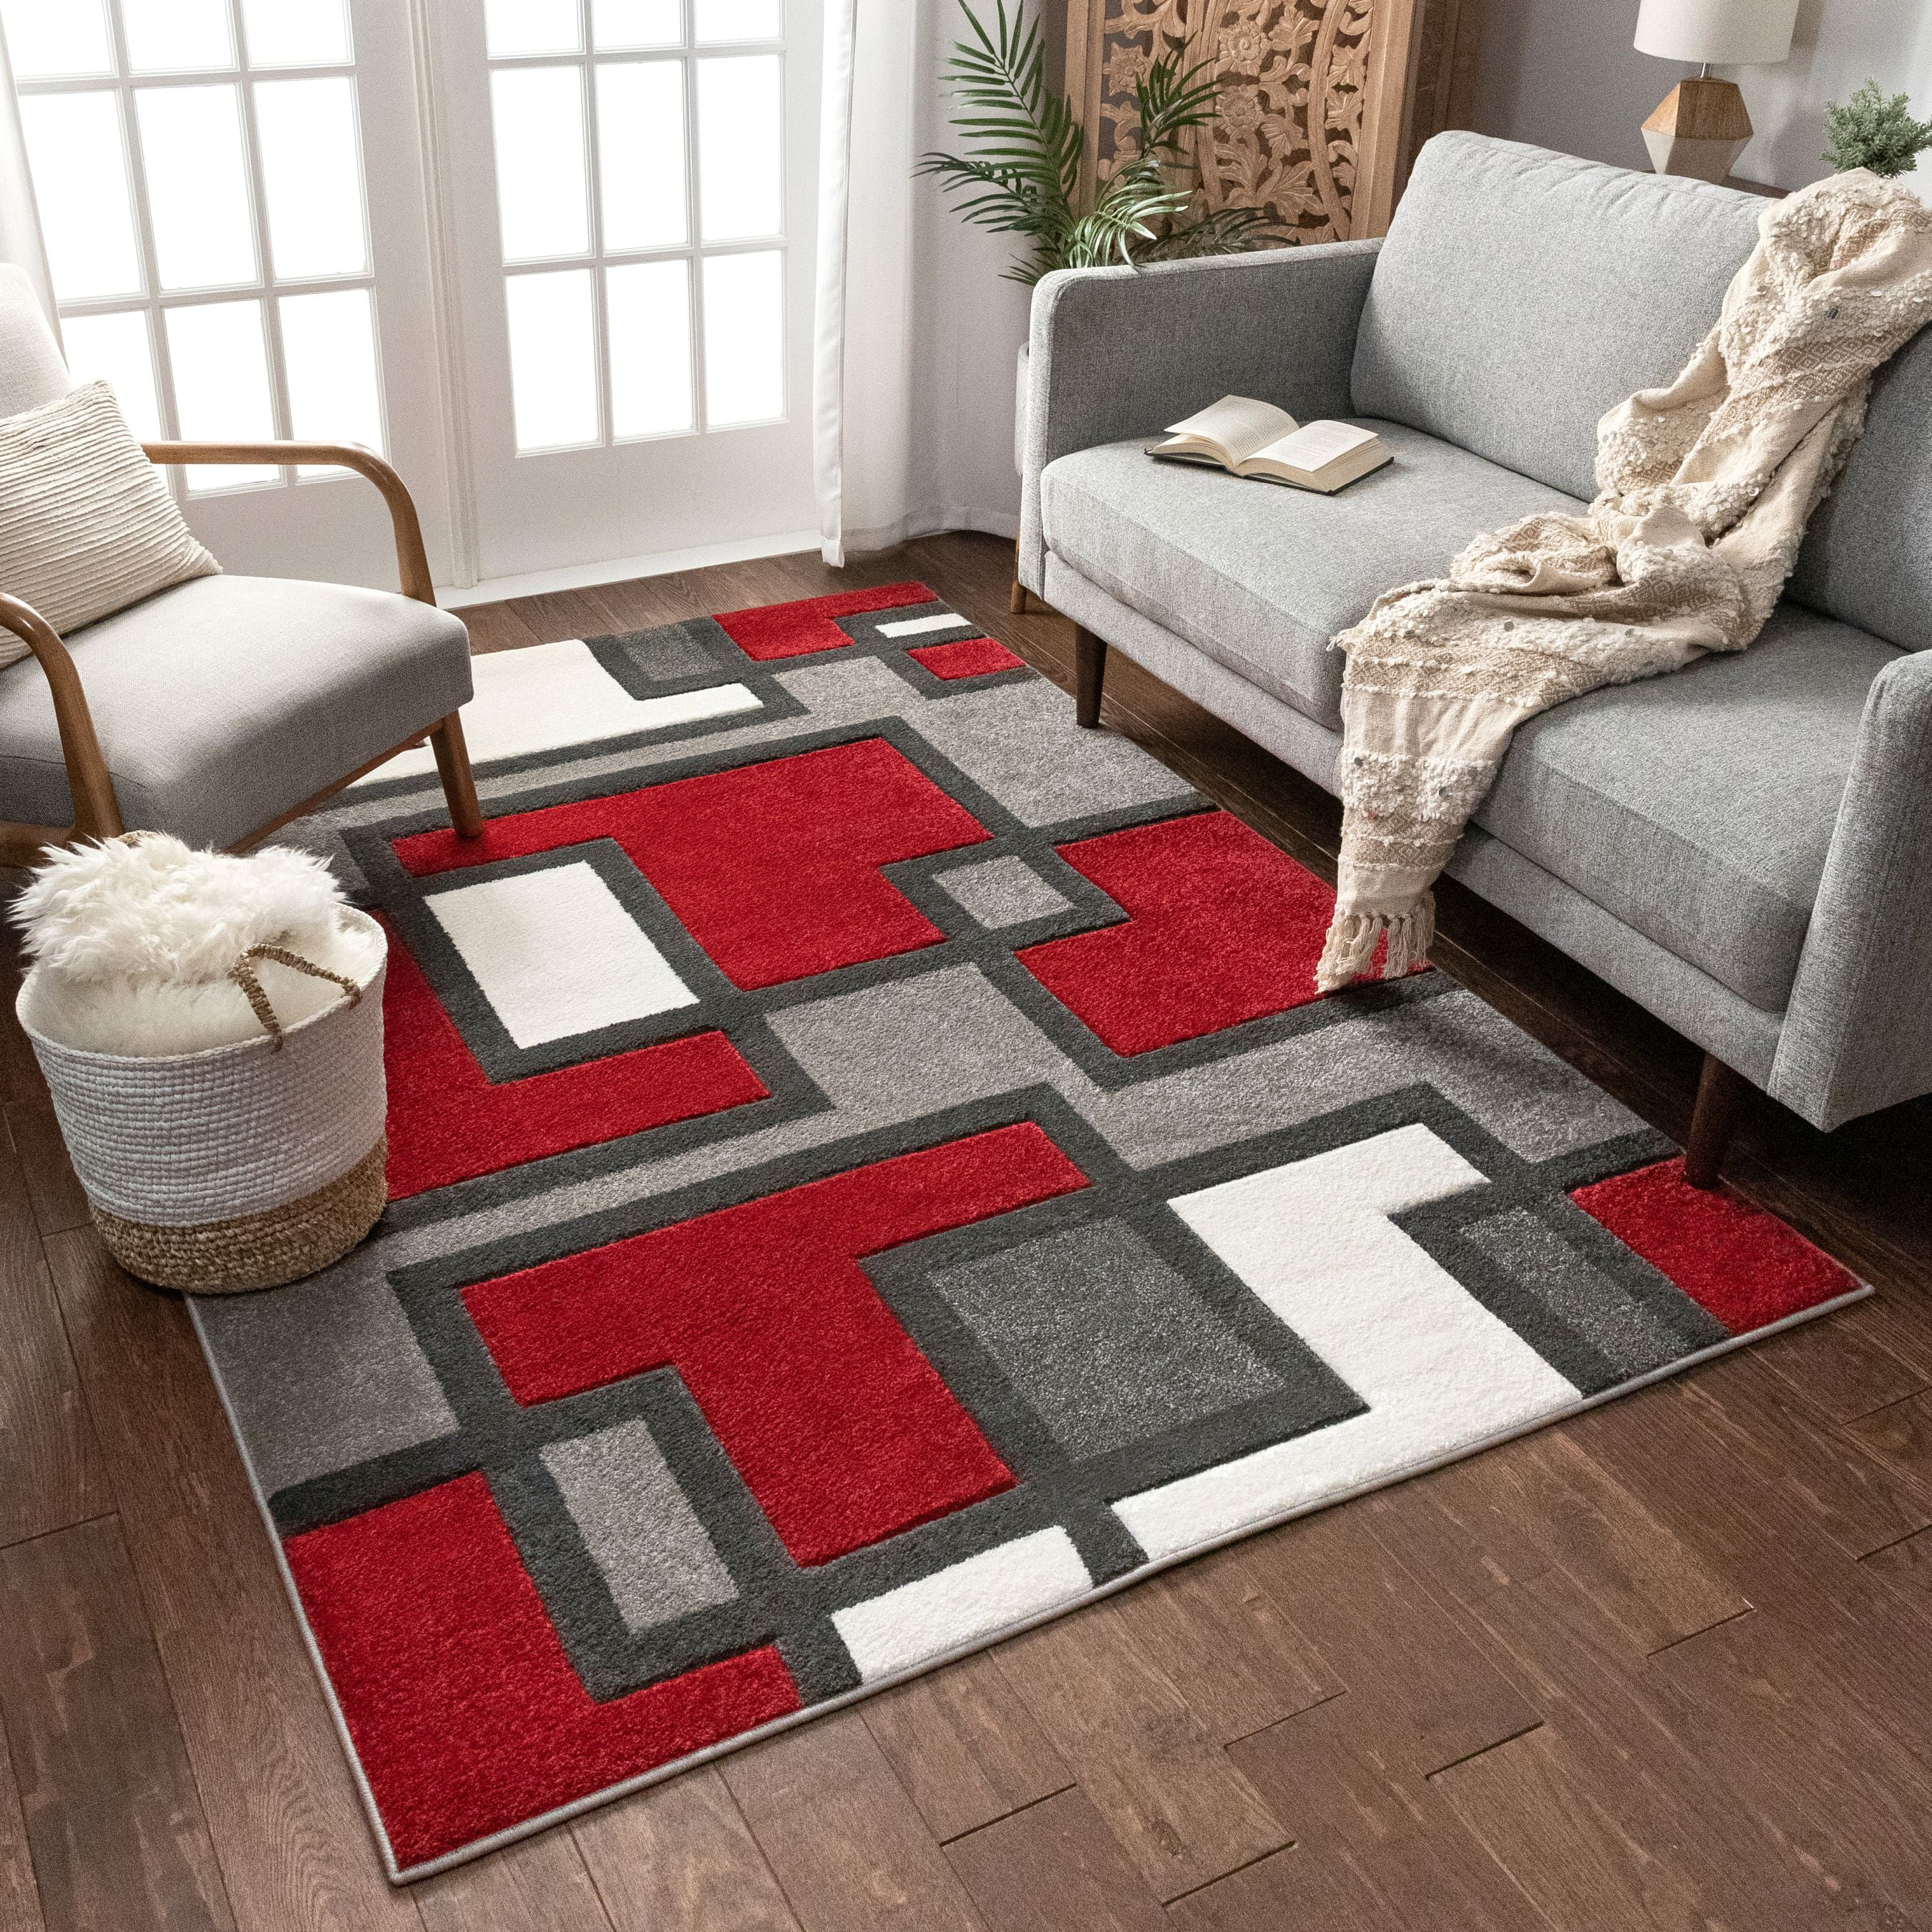 Uptown Squares Red & Grey Modern Geometric Comfy Casual Hand Carved Area  Rug 4x5 4x6 ( 3'11